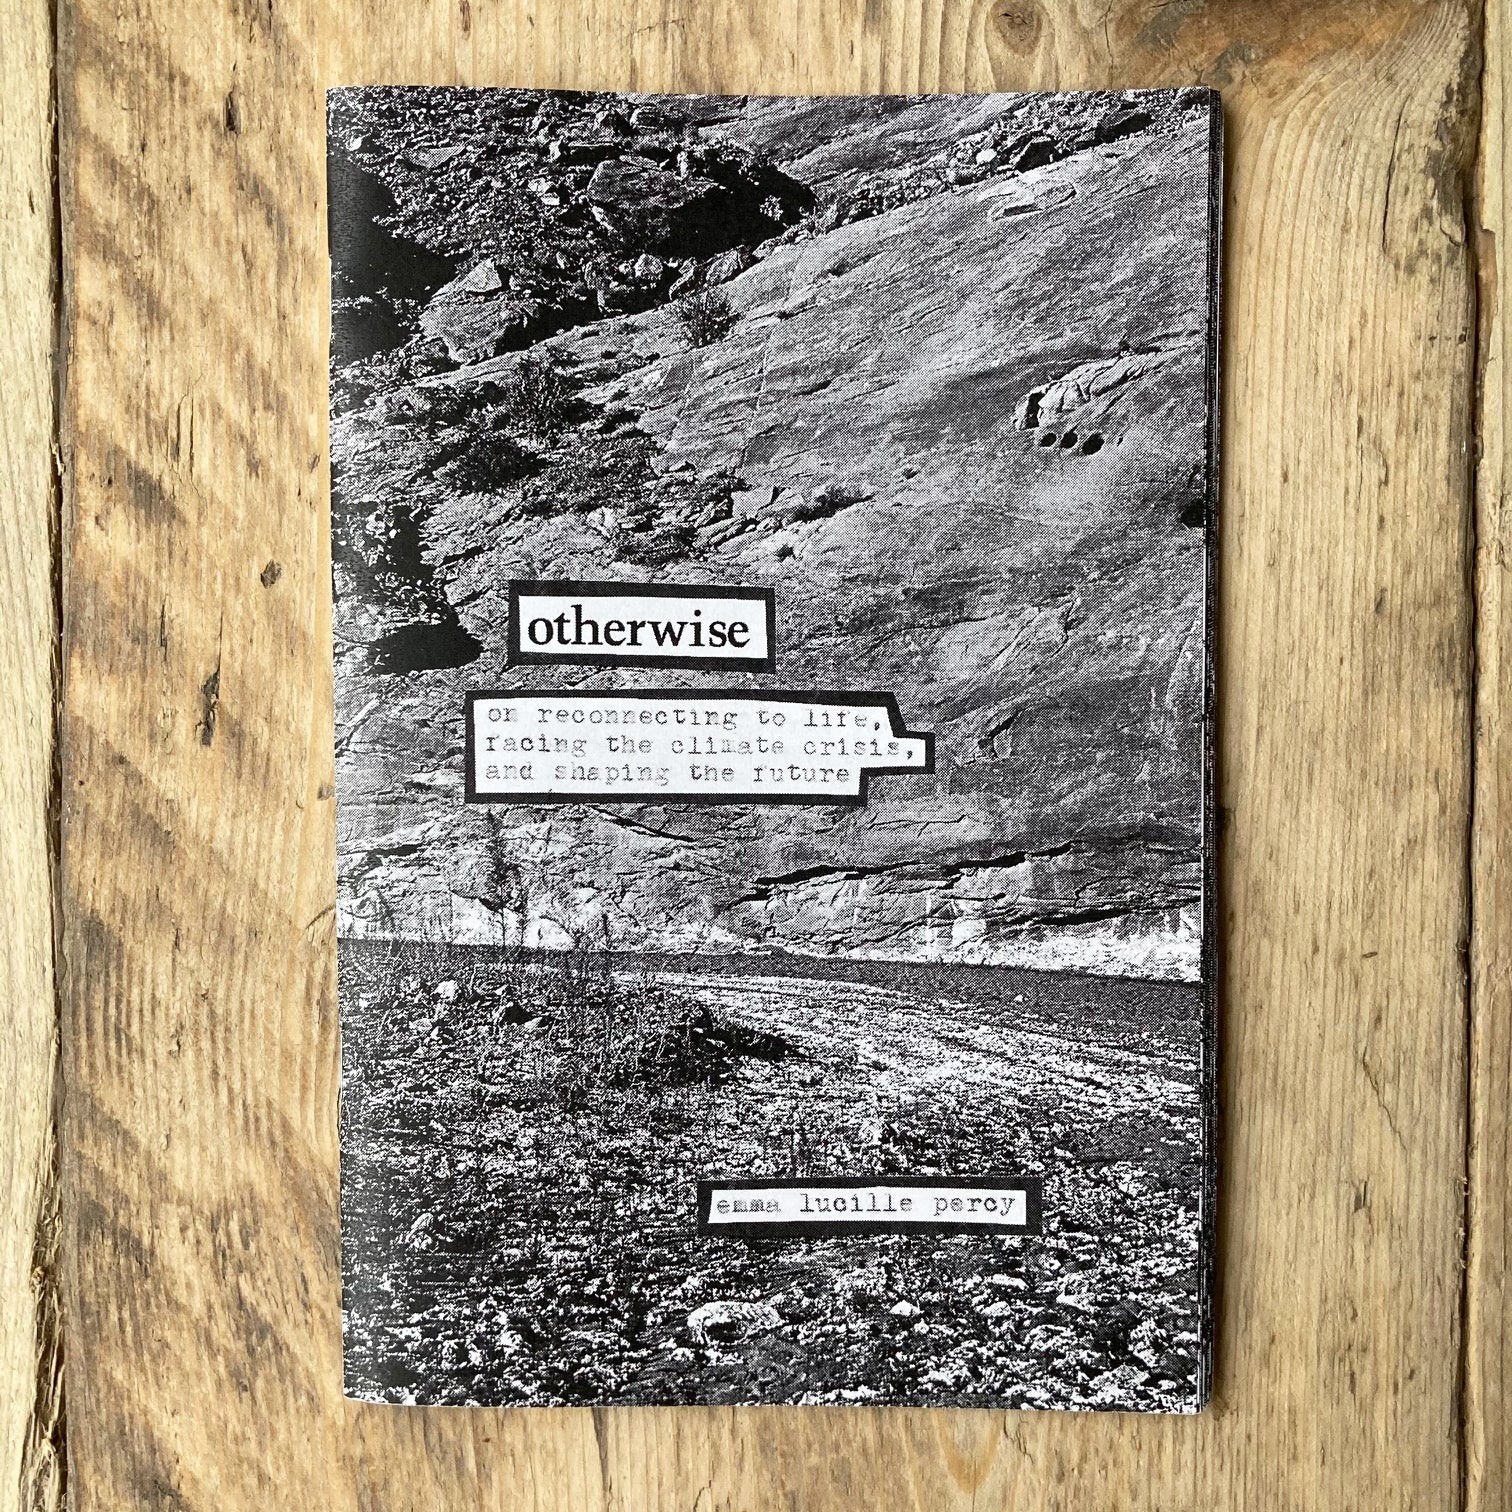 Otherwise: On Reconnecting To Life, Facing The Climate Crisis, And Shaping The Future - Zine - Antiquated Future